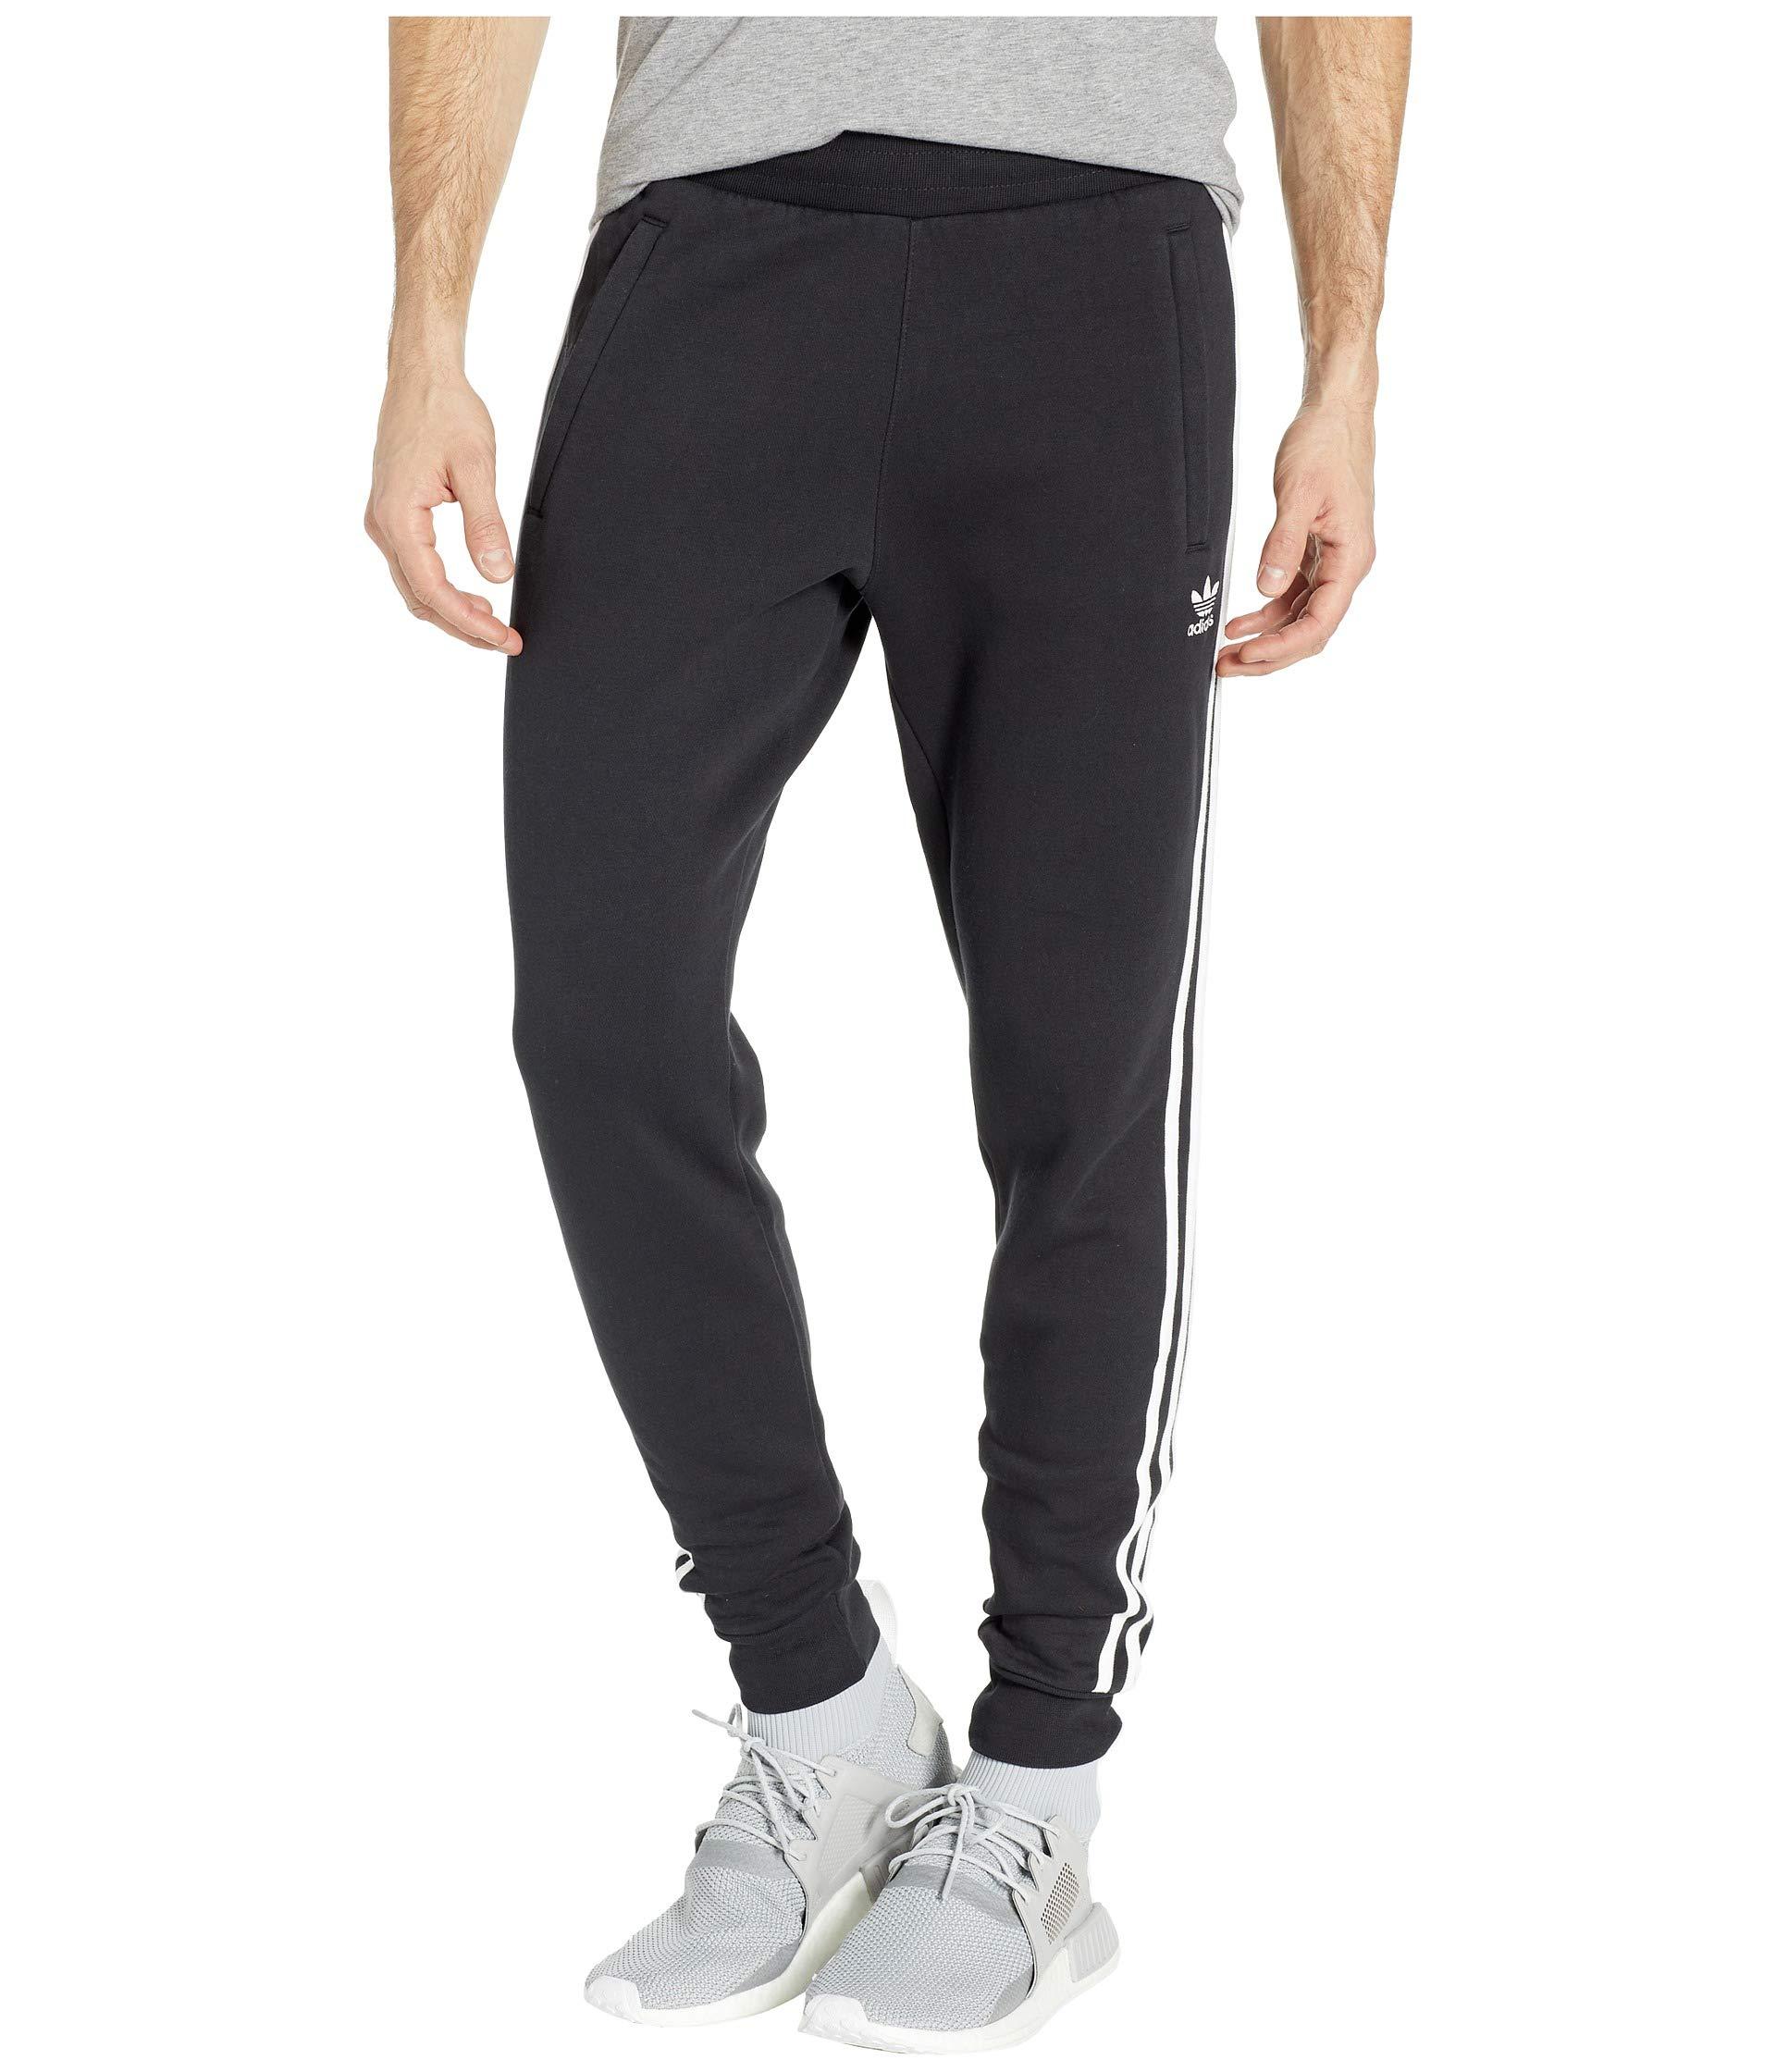 adidas Originals Synthetic 3-stripes Pants in Black for Men - Lyst